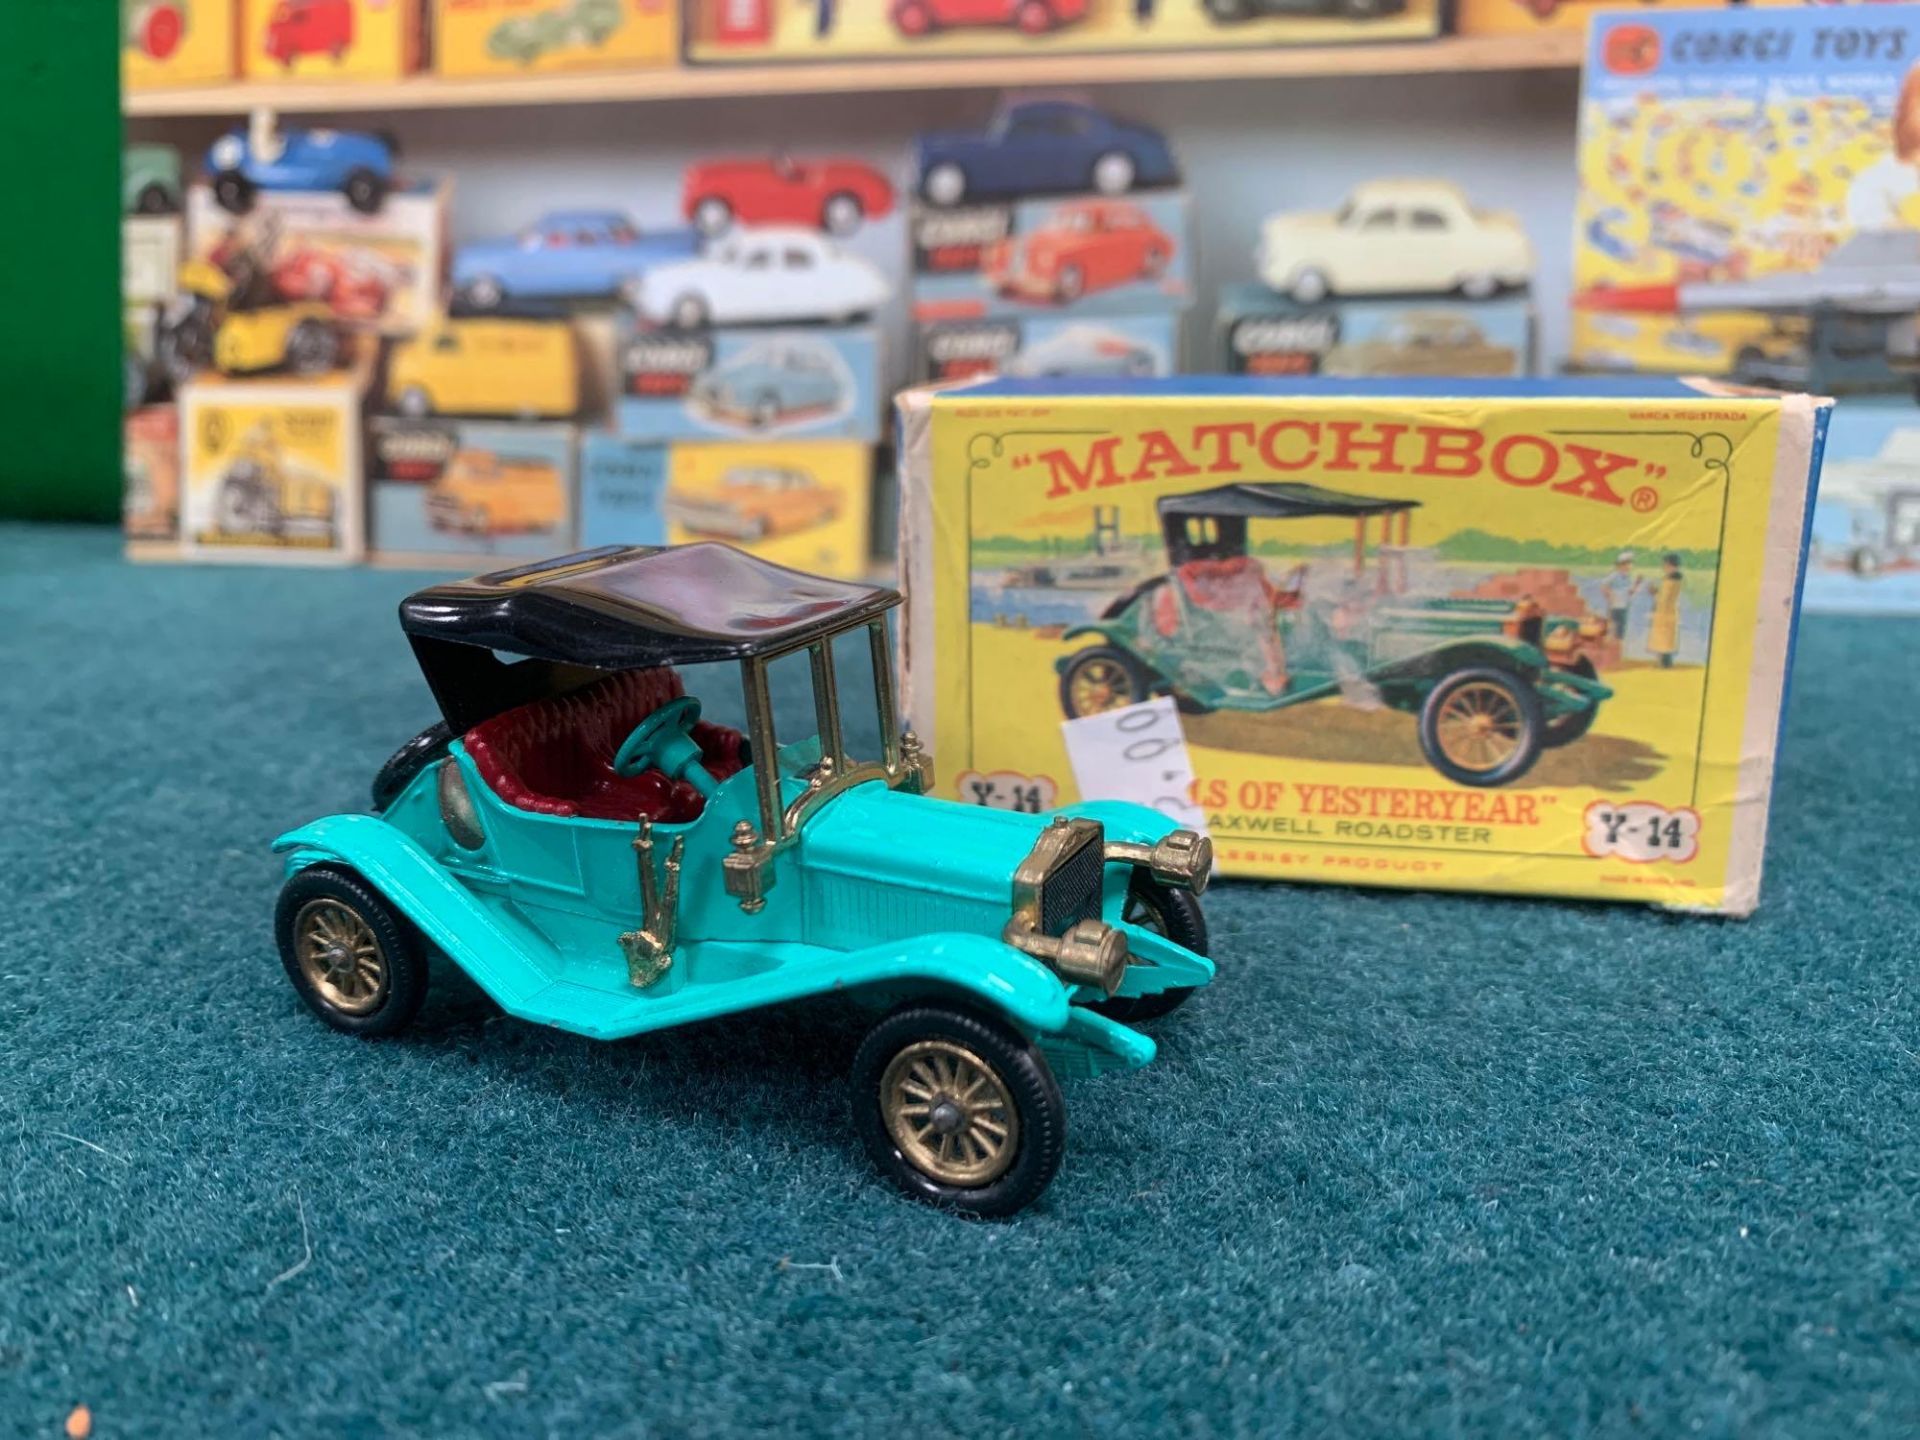 Matchbox Lesney Models Of Yesteryear 1911 Maxwell Roadster Y-14